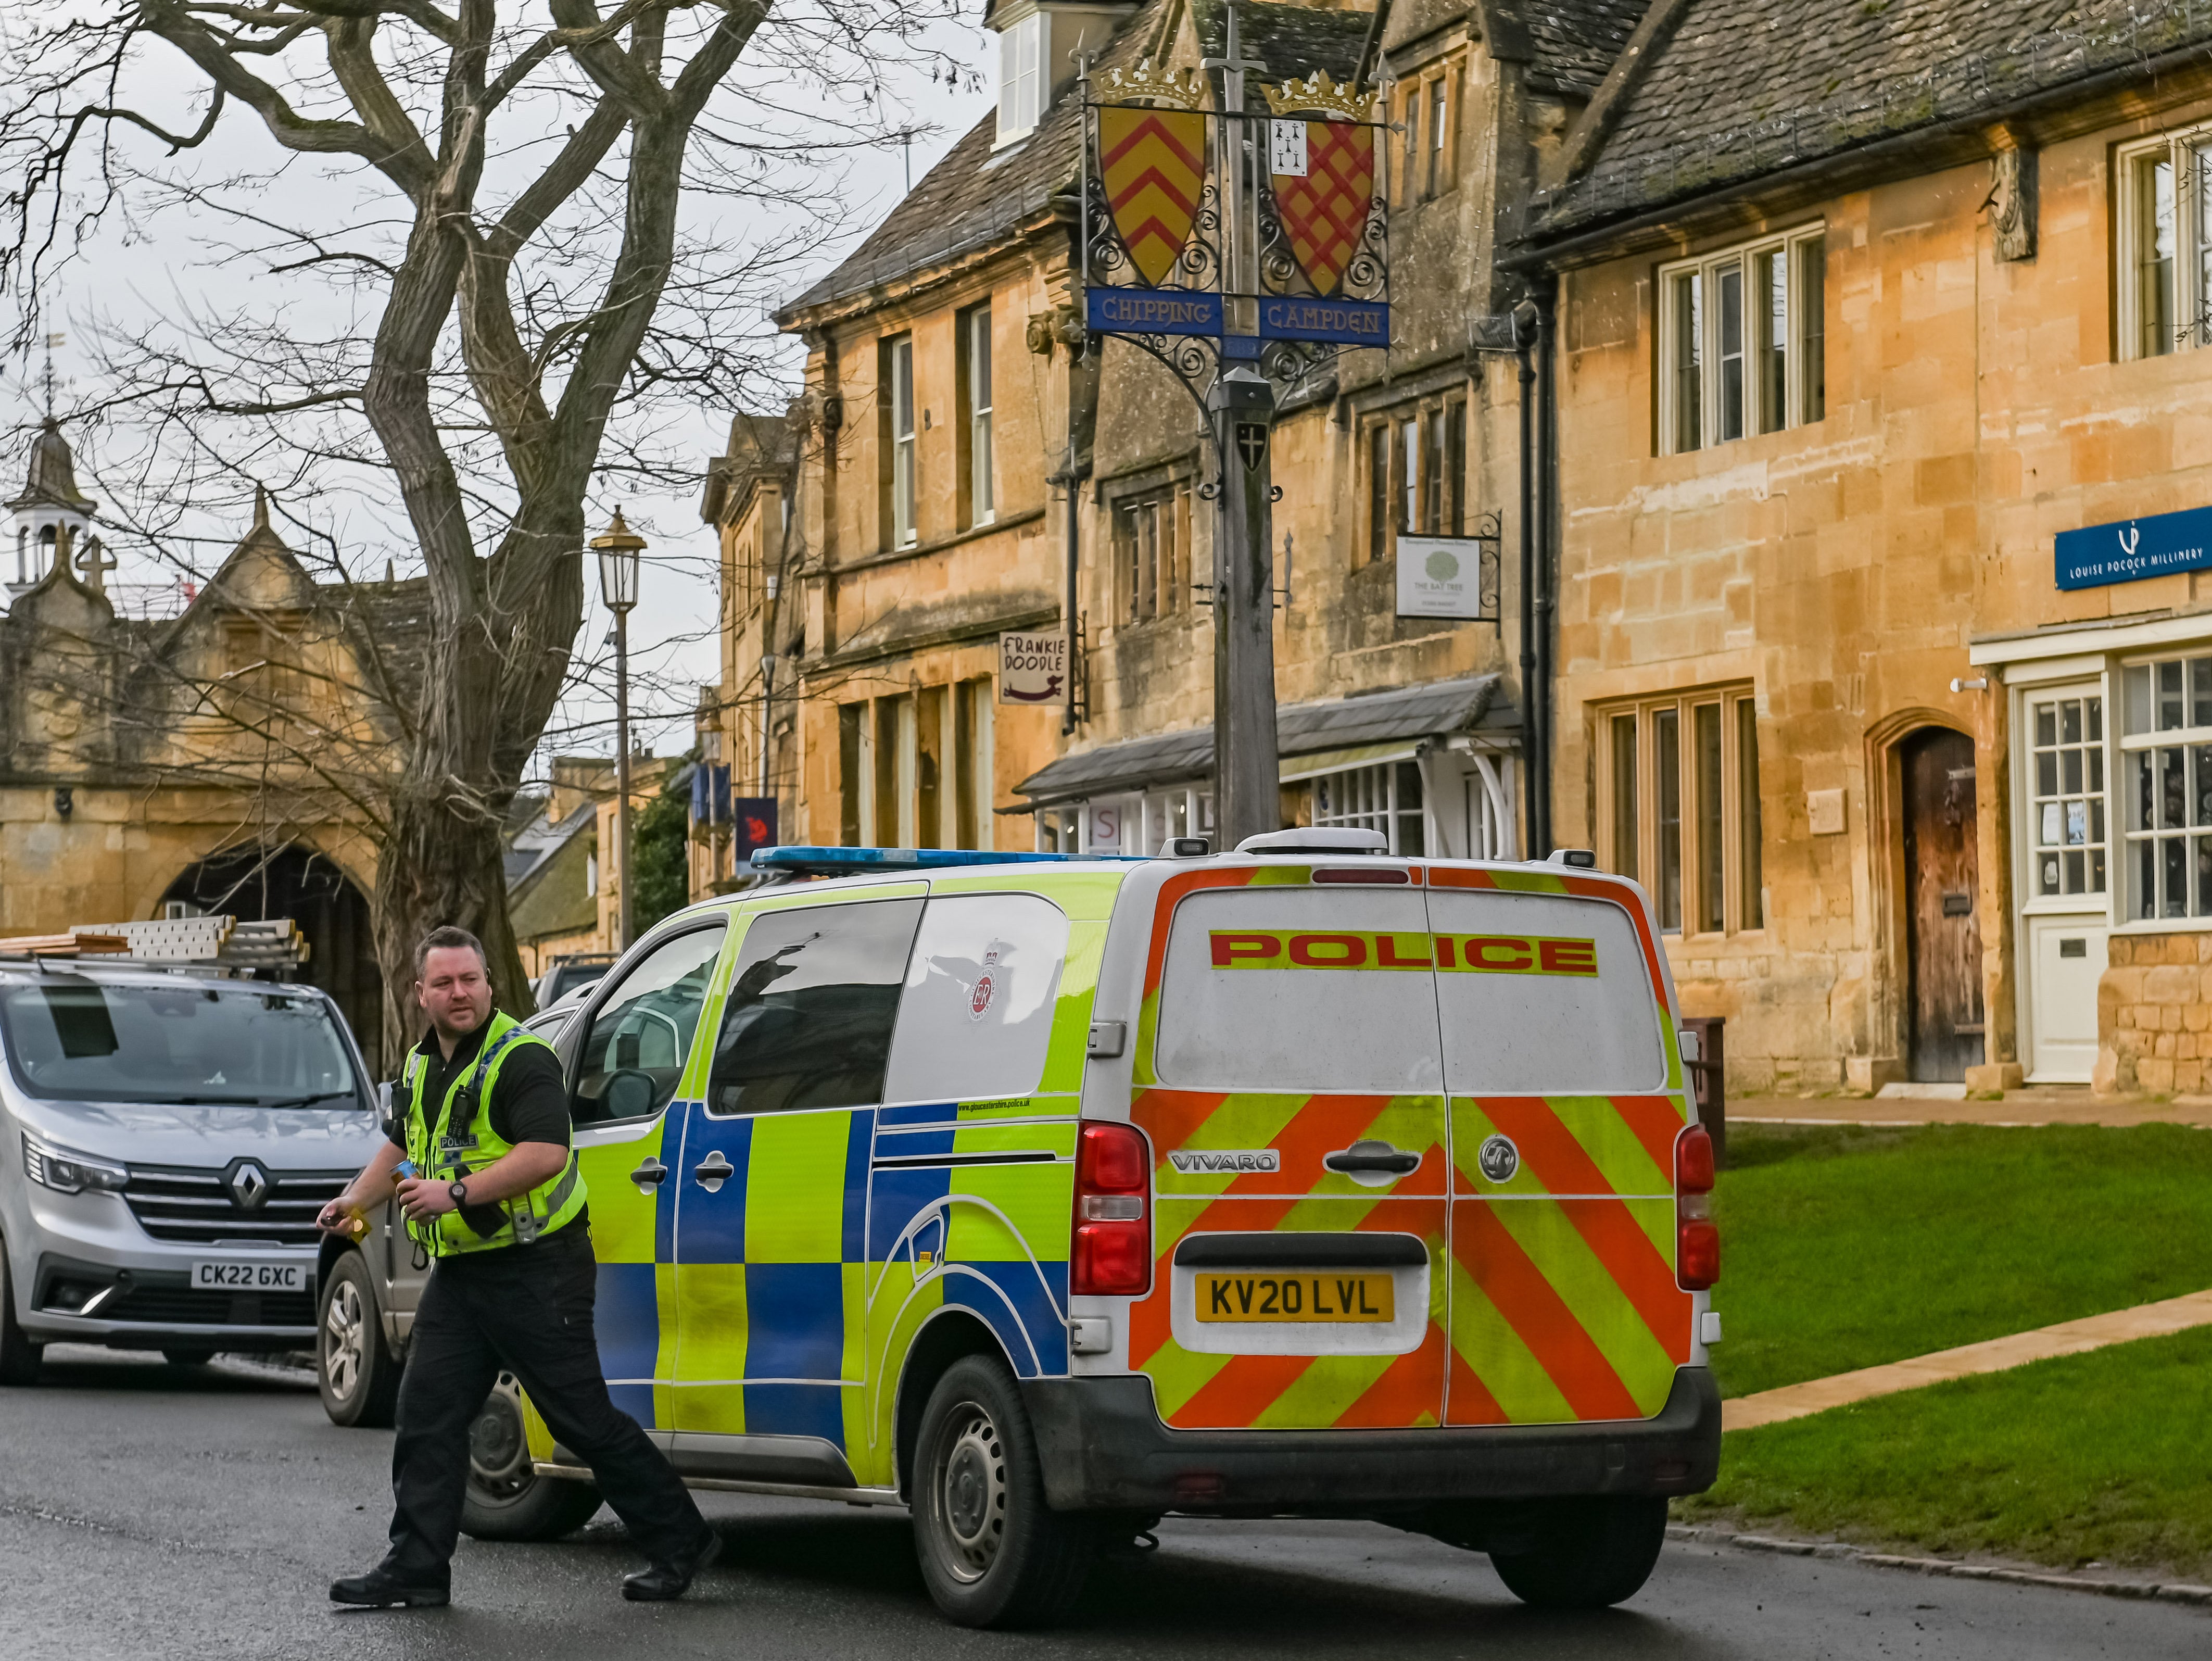 Police at the scene of the death in Chipping Campden